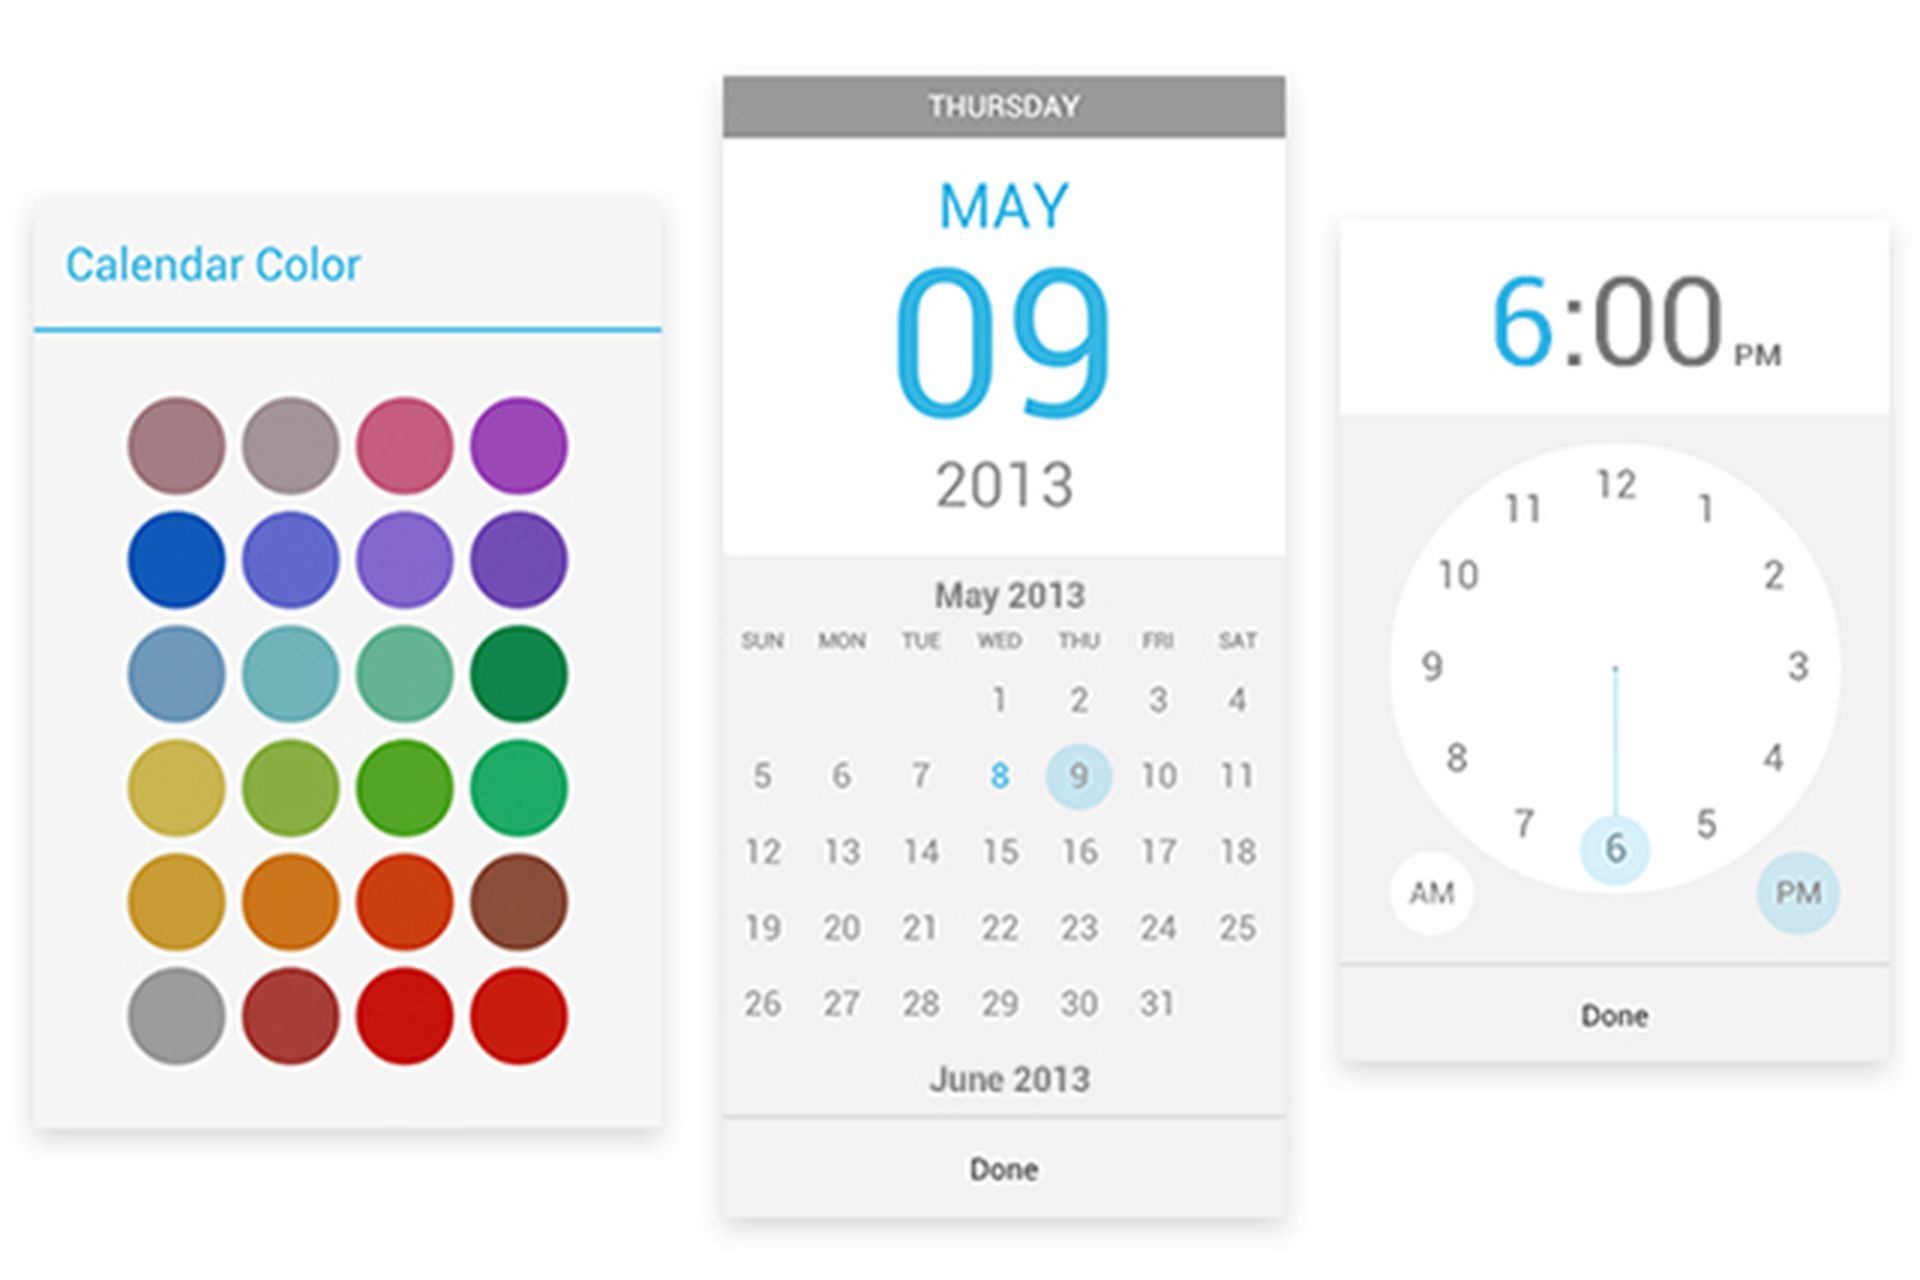 Google Calendar for Android updated with new appointment interface